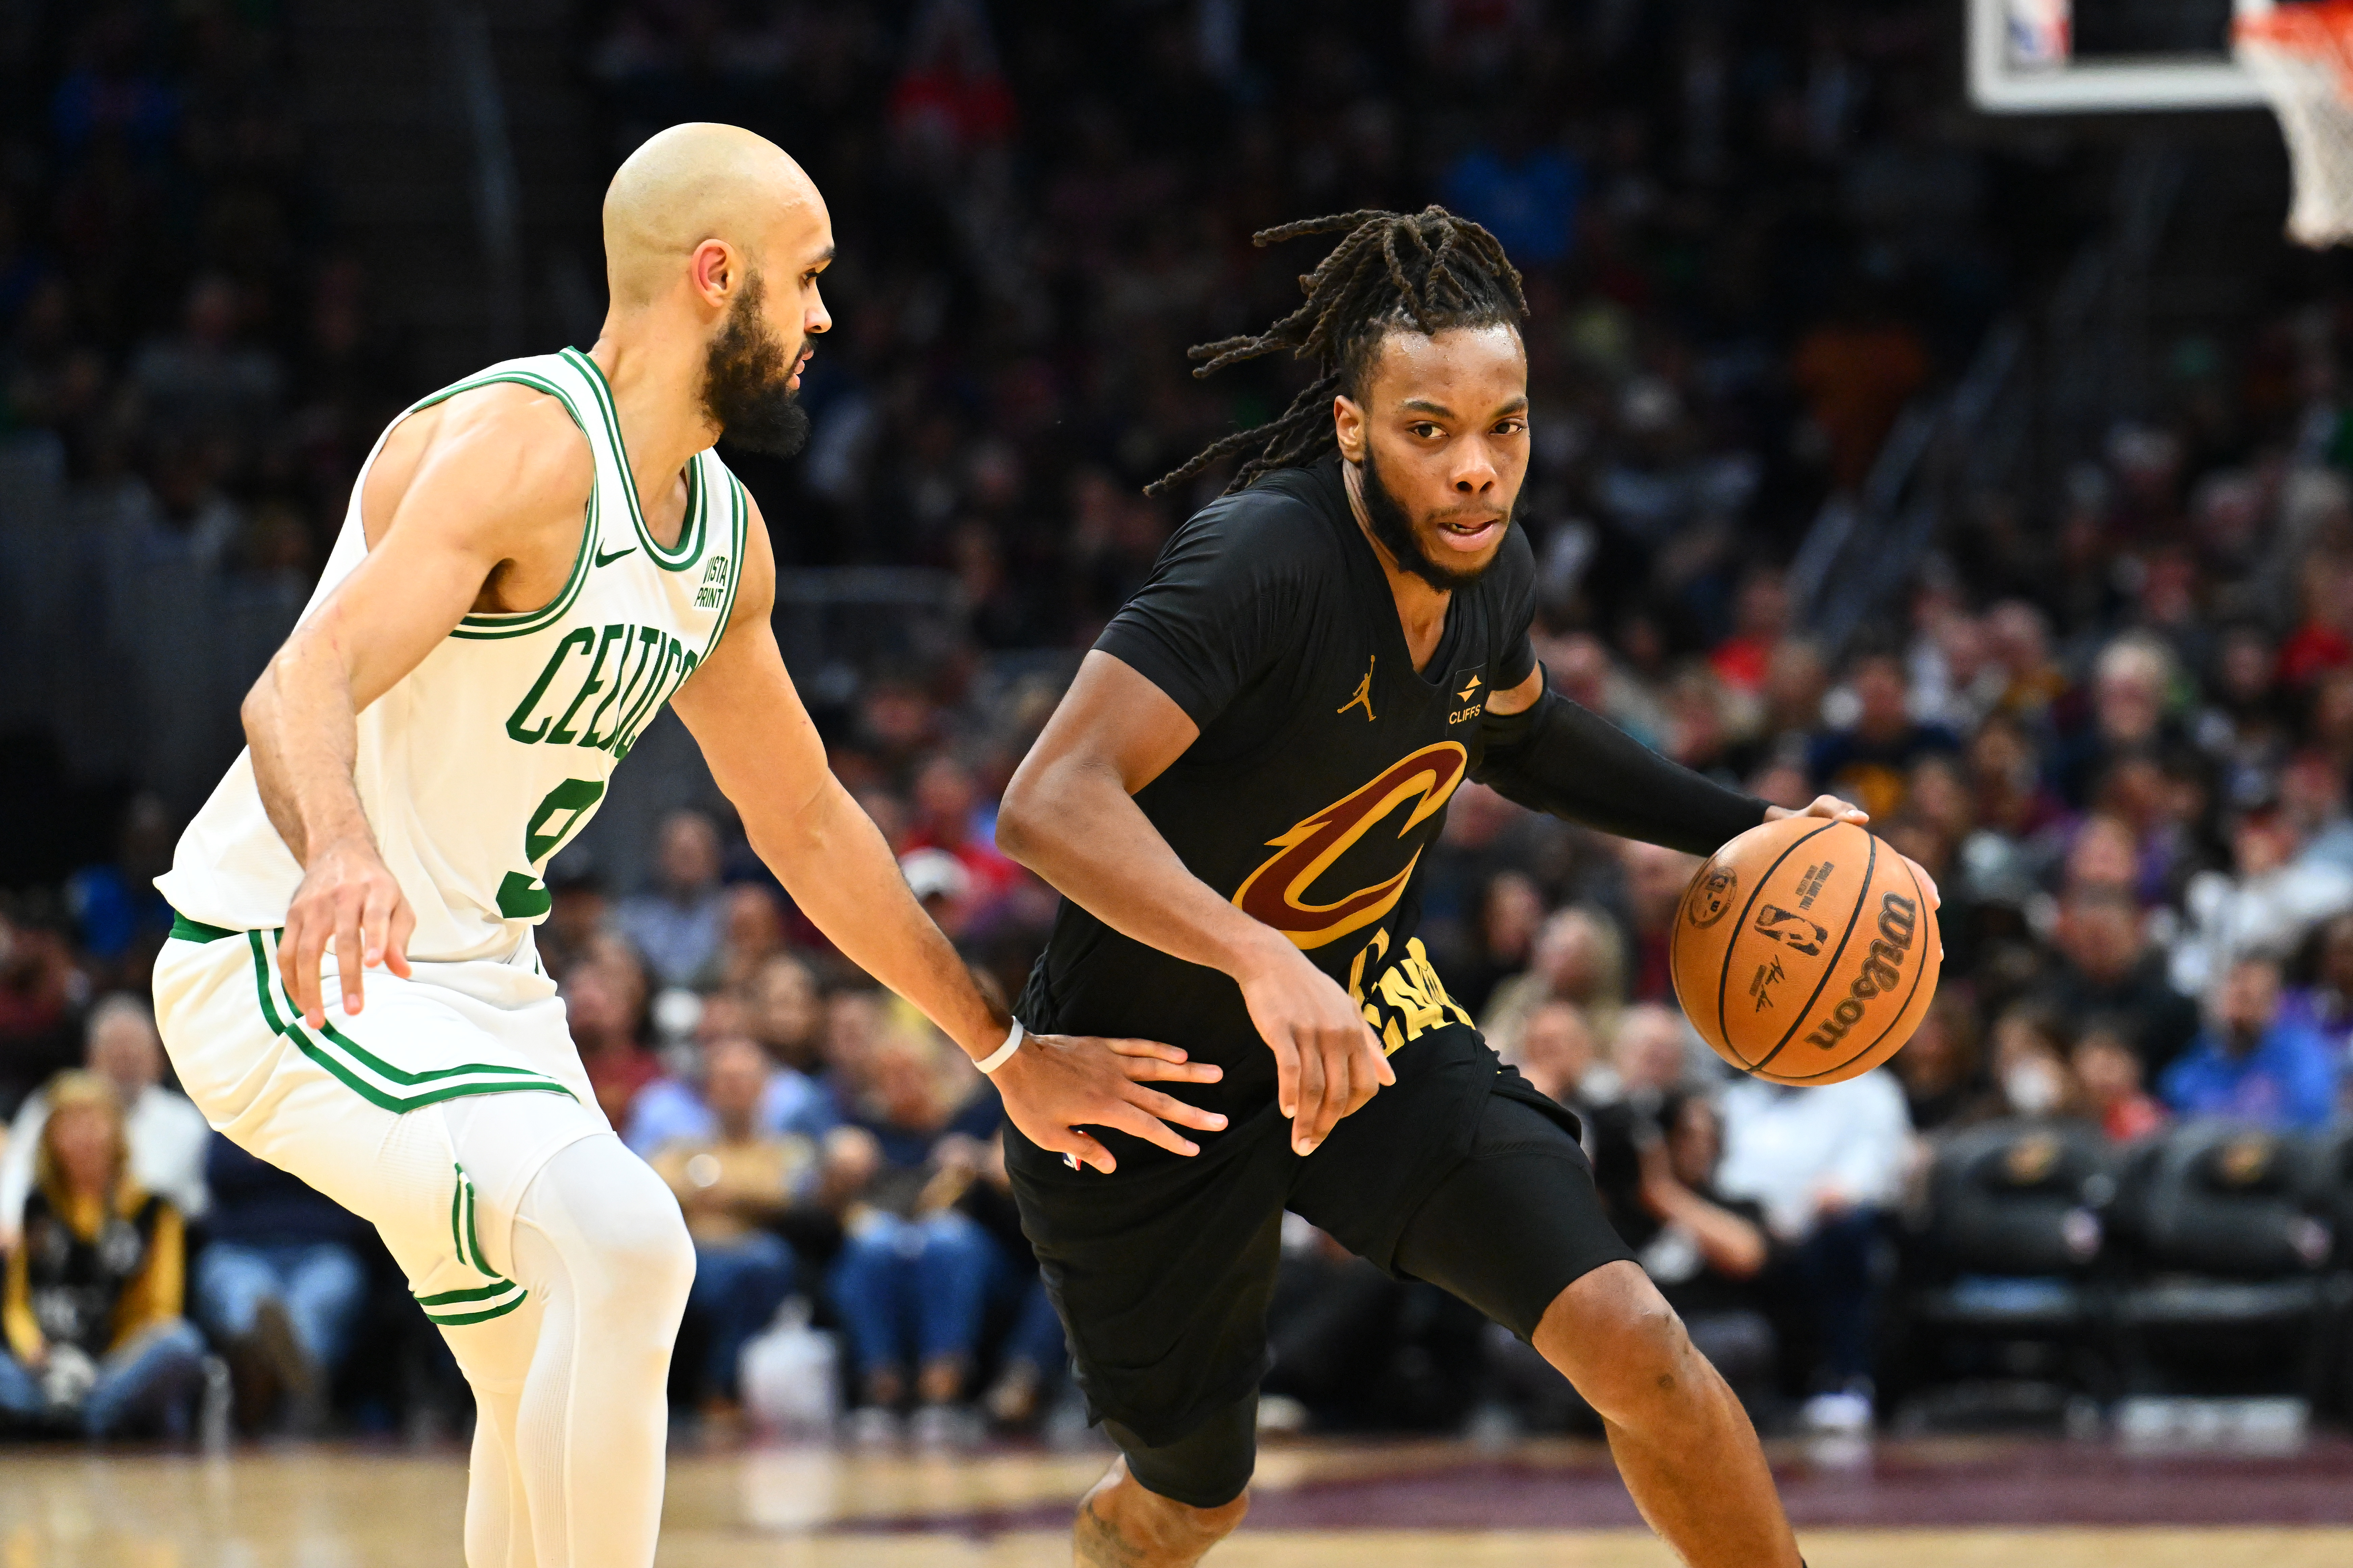 Dialing in on matchups in the Boston Celtics’ East semis series with the Cleveland Cavaliers